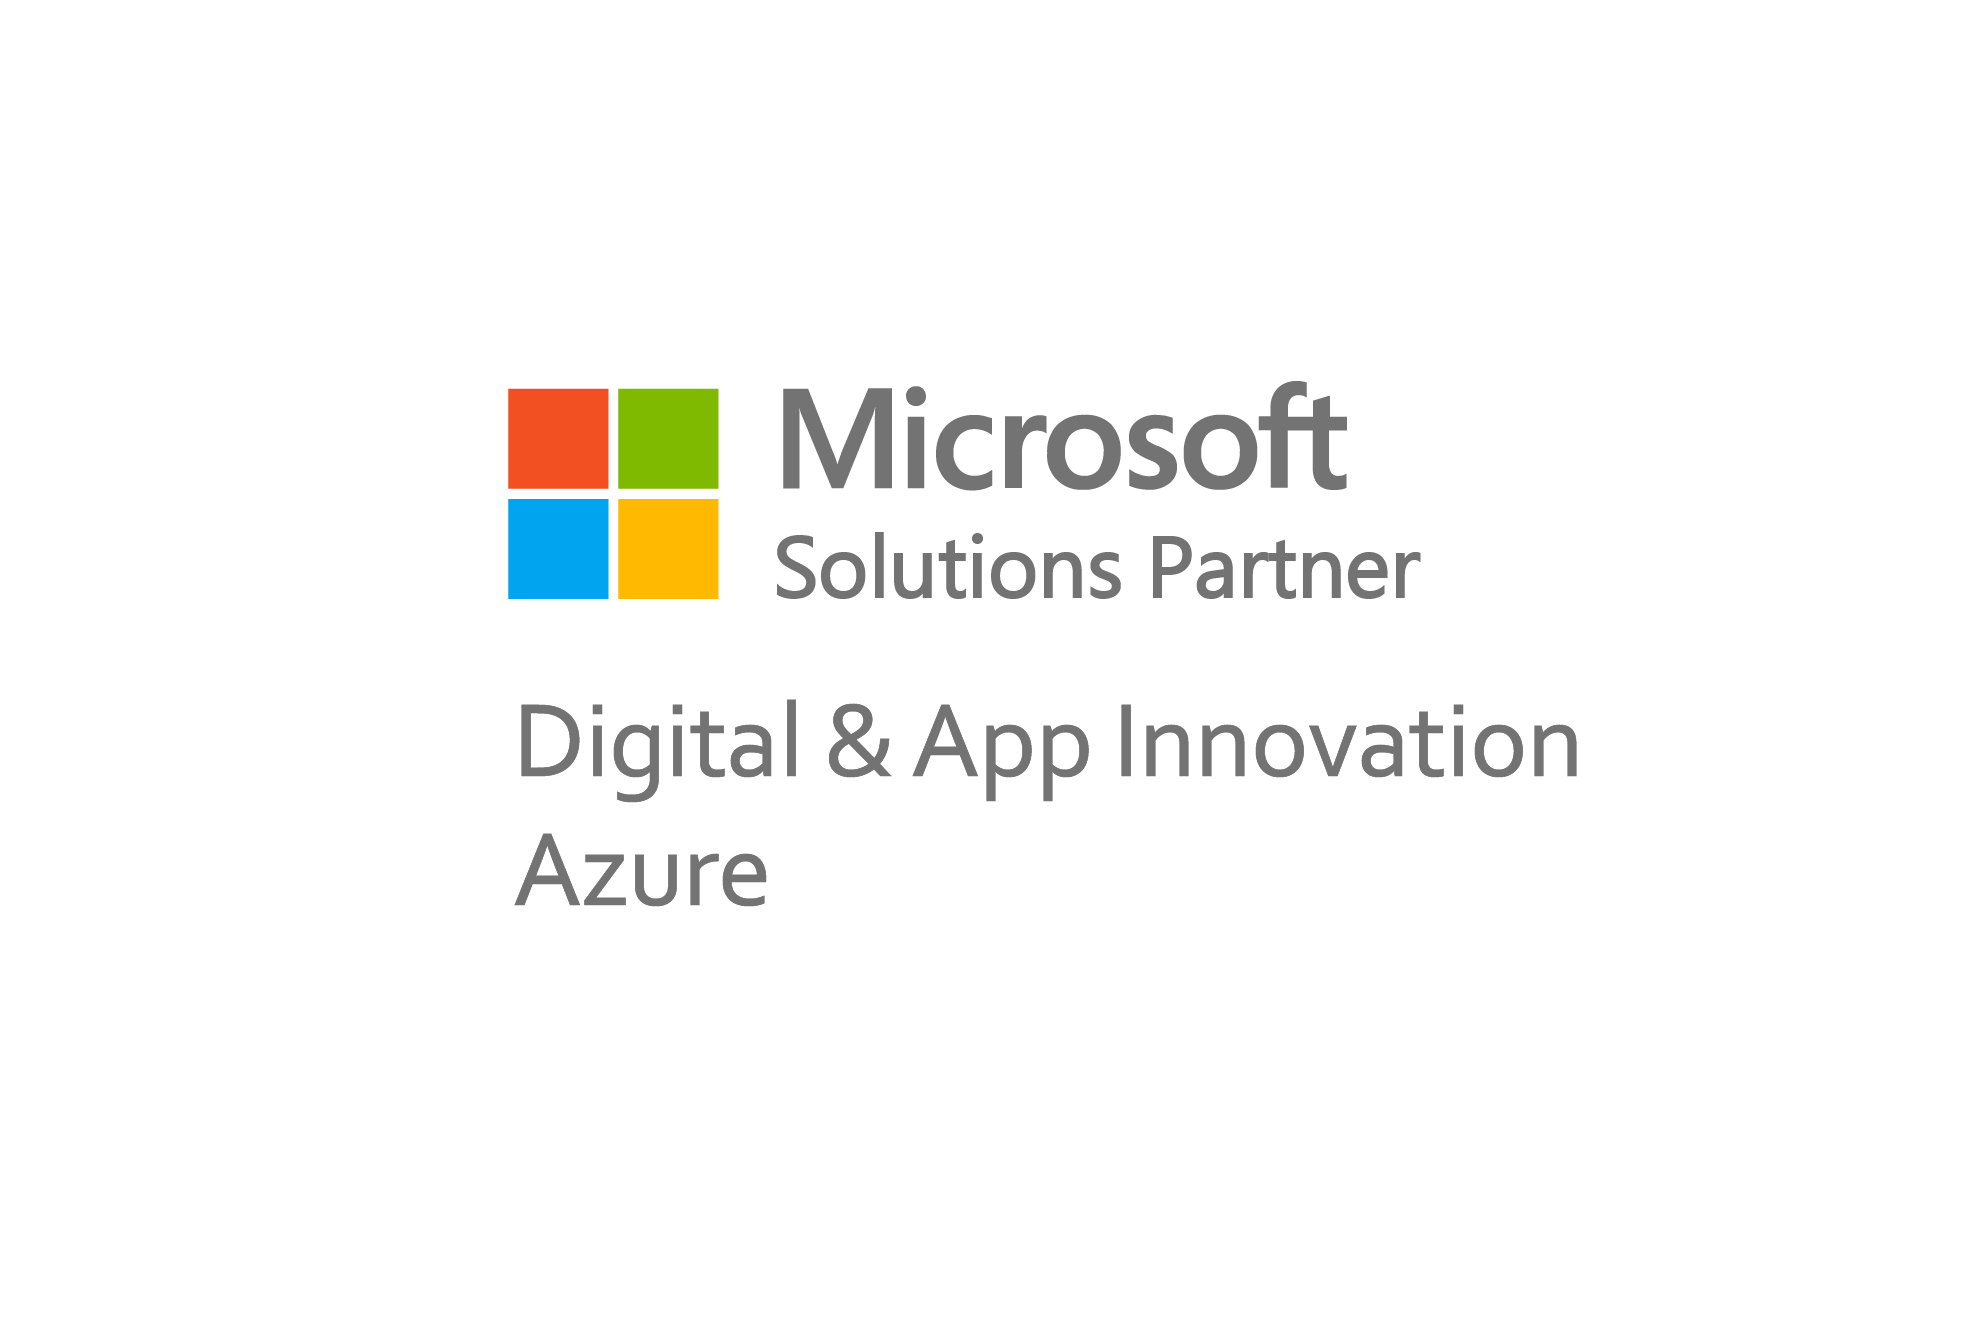 Atech is now a Solutions Partner for Digital & Application Innovation